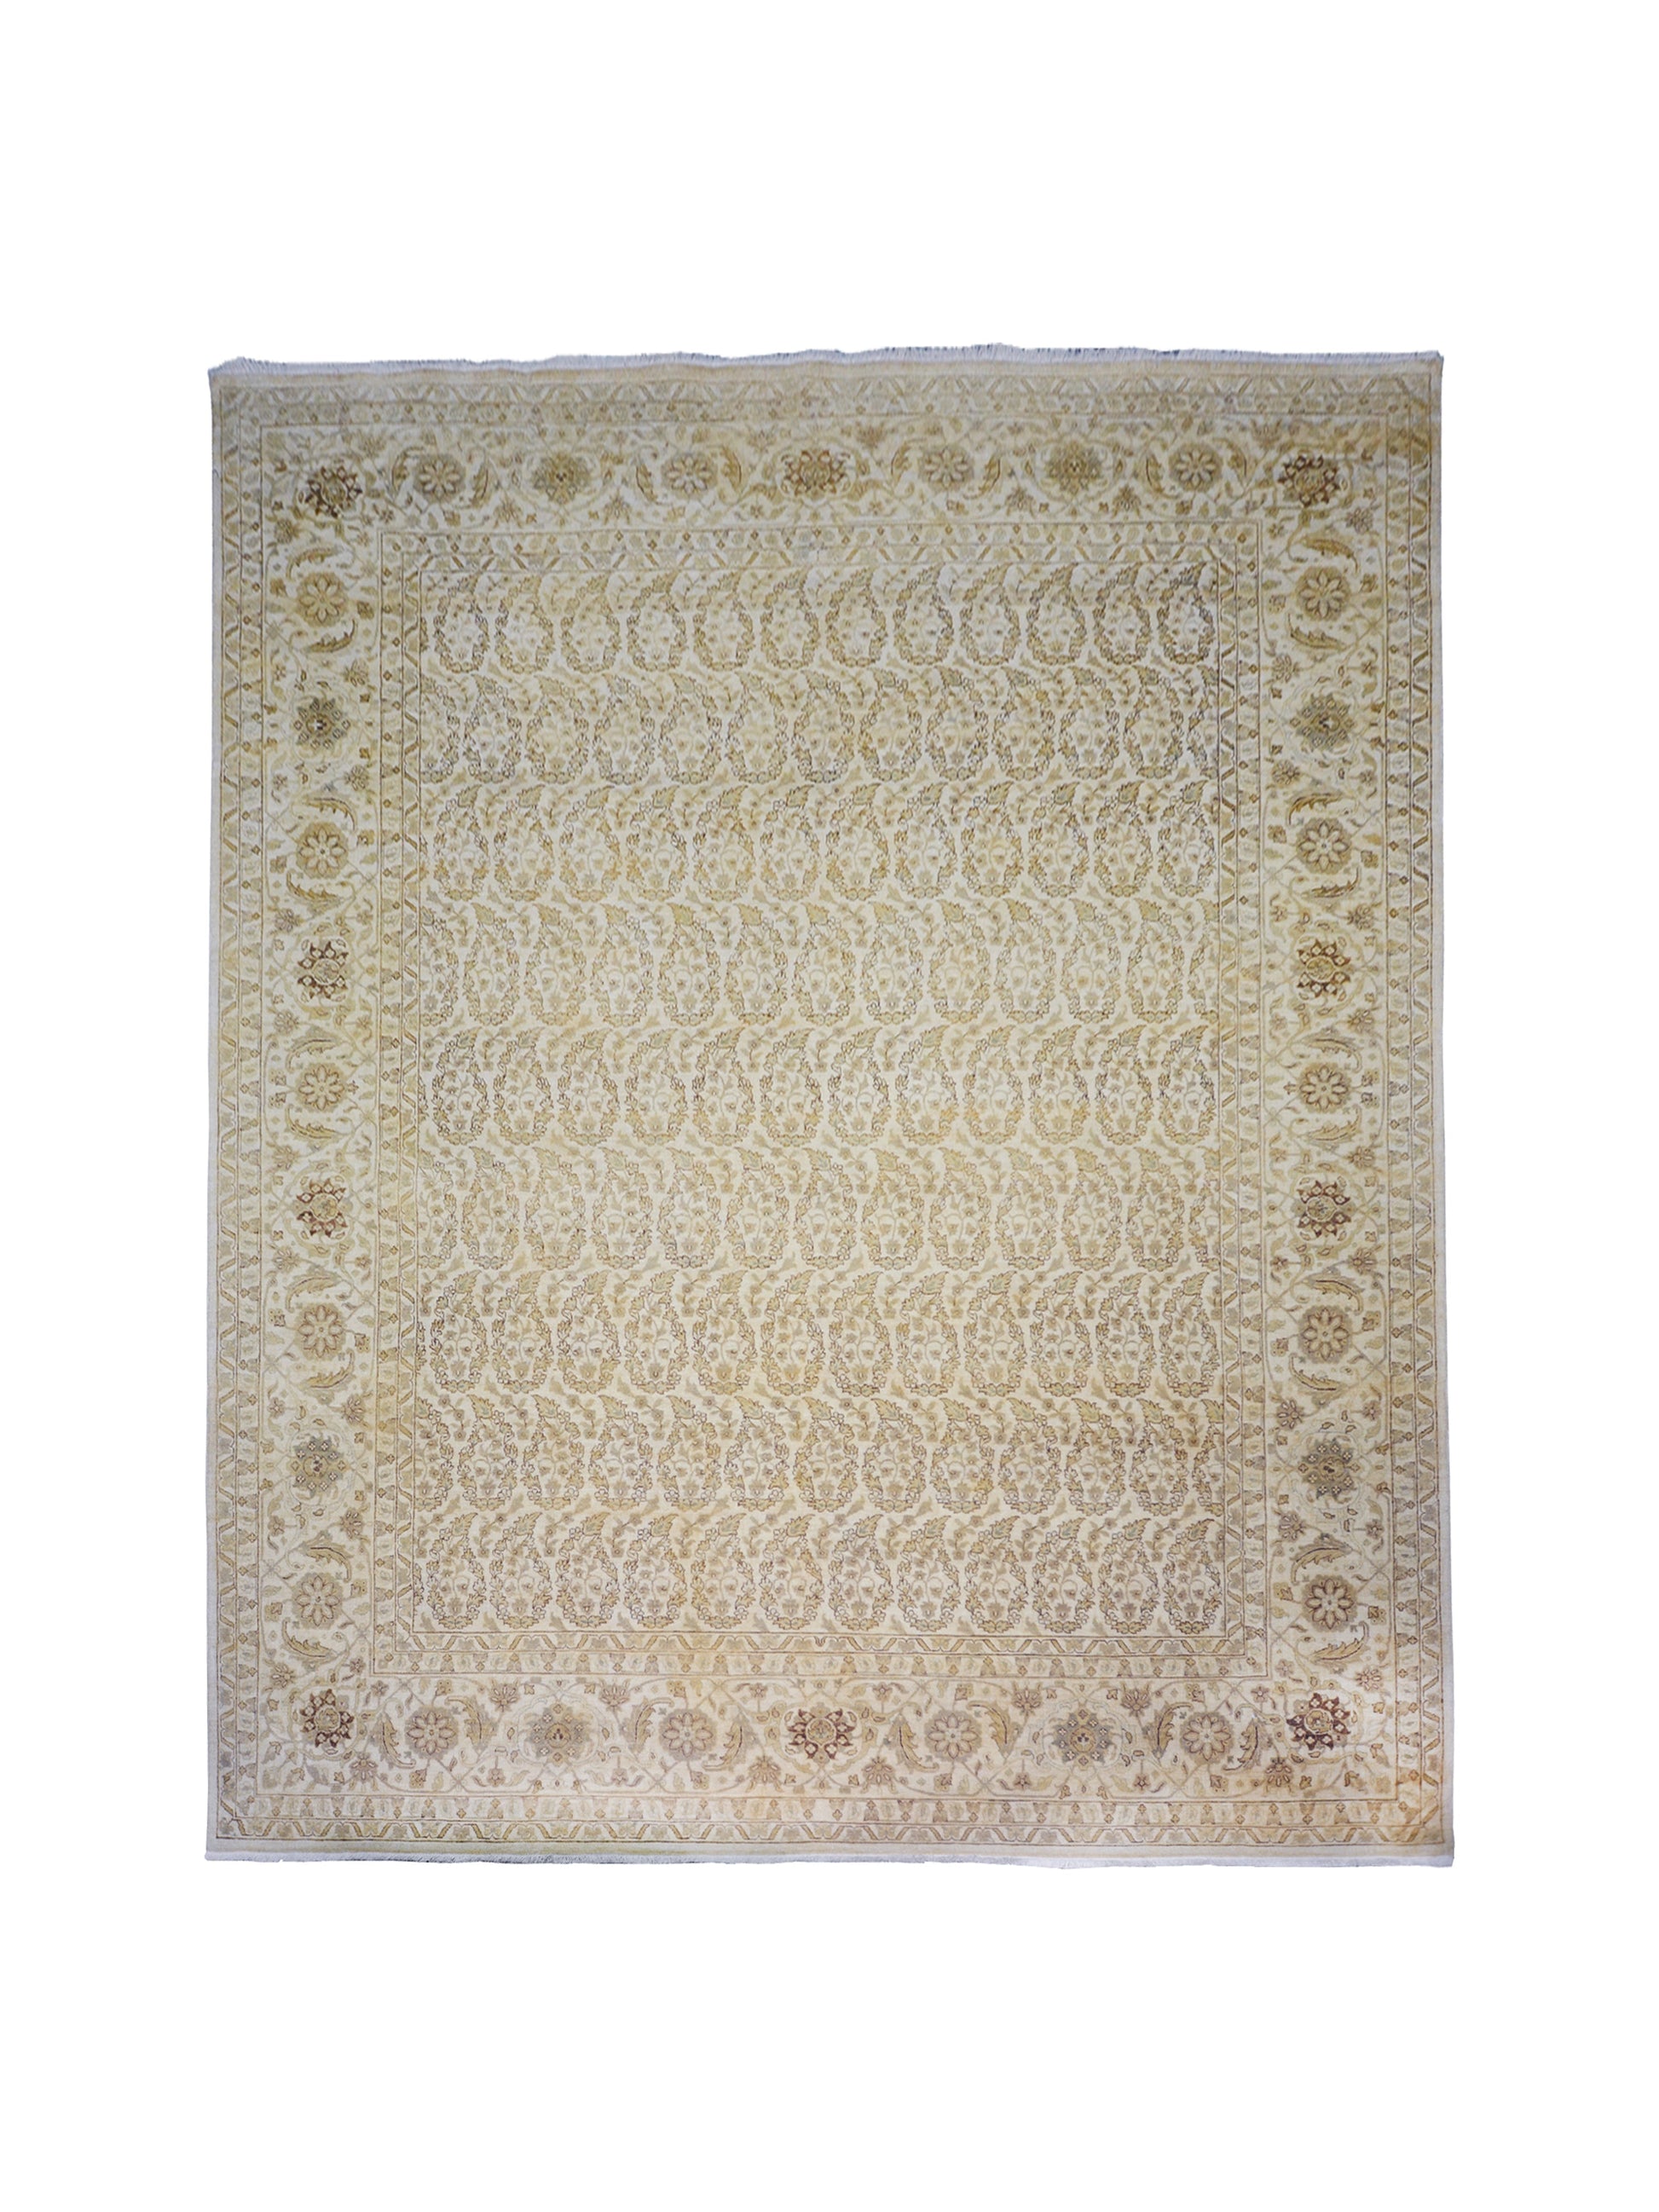 Get trendy with Lychee Ivory, Beige and Brown Traditional Mamluk Pure Wool Luxury Handknotted Area Rug - Traditional Rugs available at Jaipur Oriental Rugs. Grab yours for $3499.00 today!